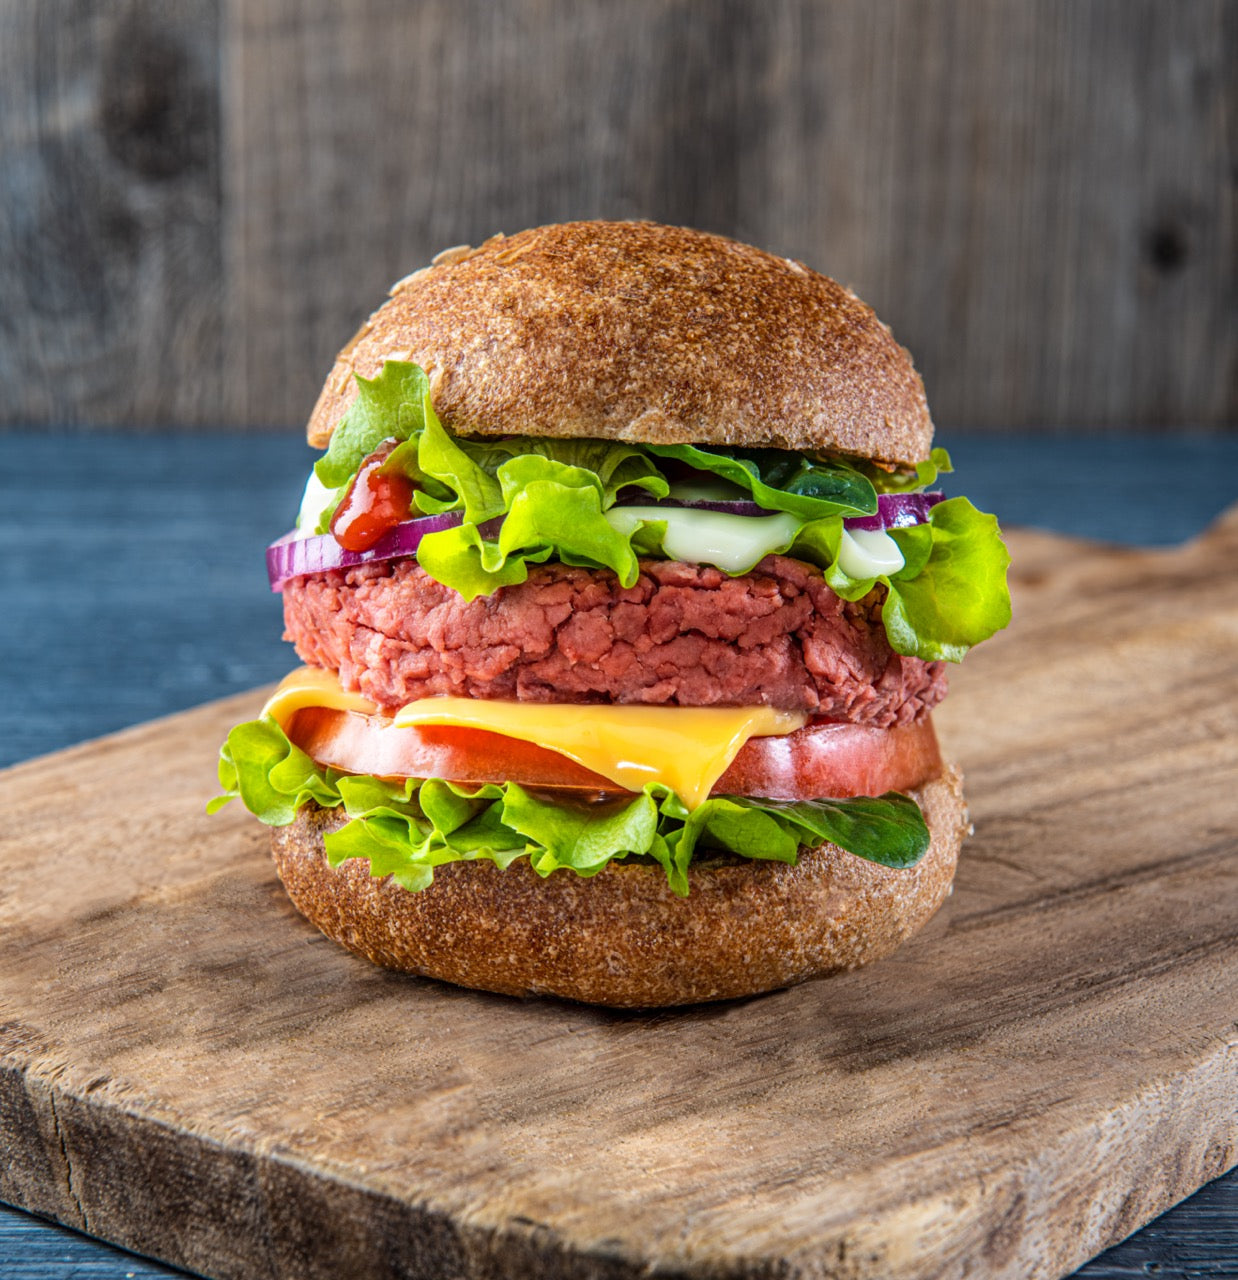 Simple Rules to Buying Plant-Based Burgers